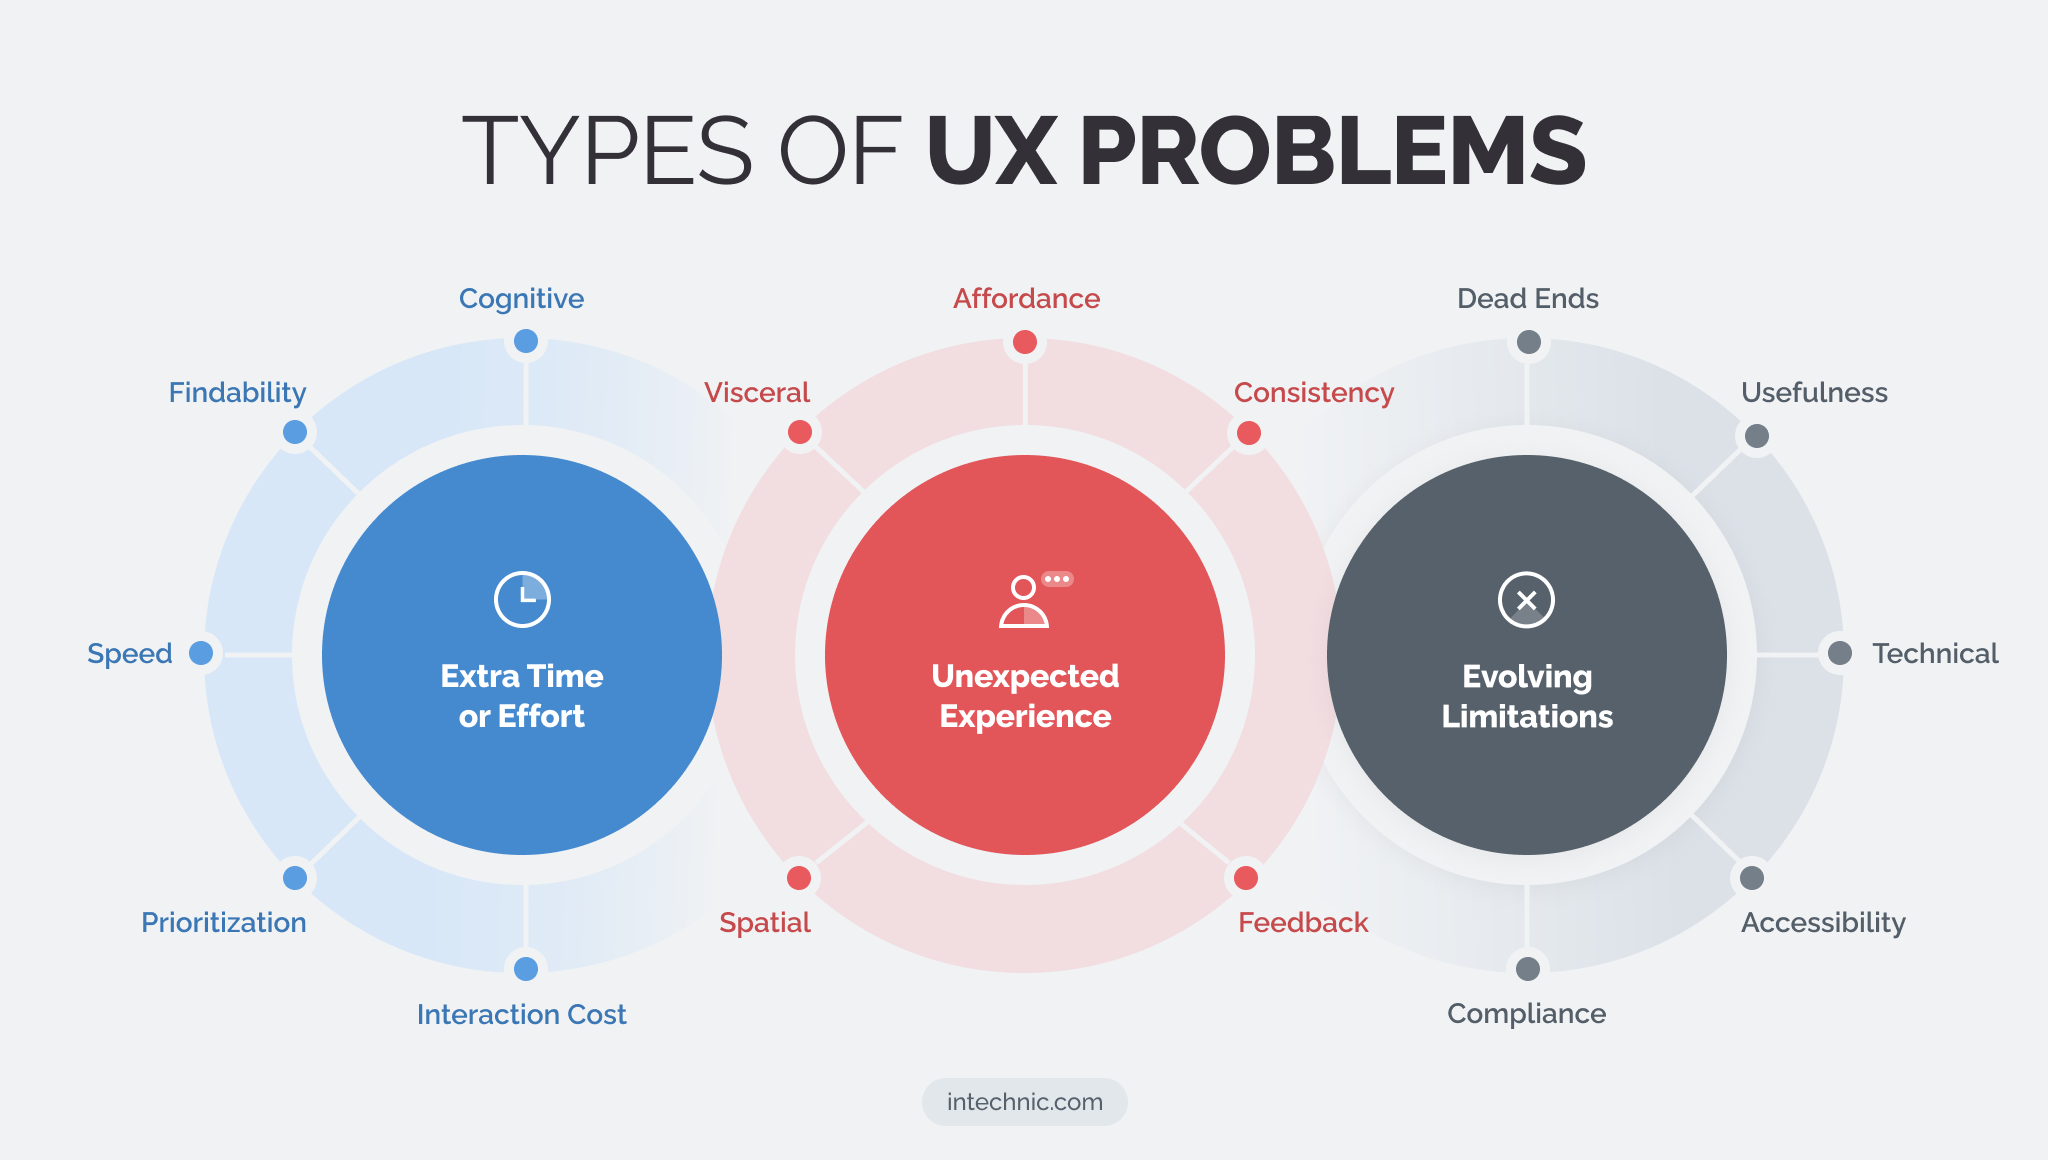 Types of UX problems